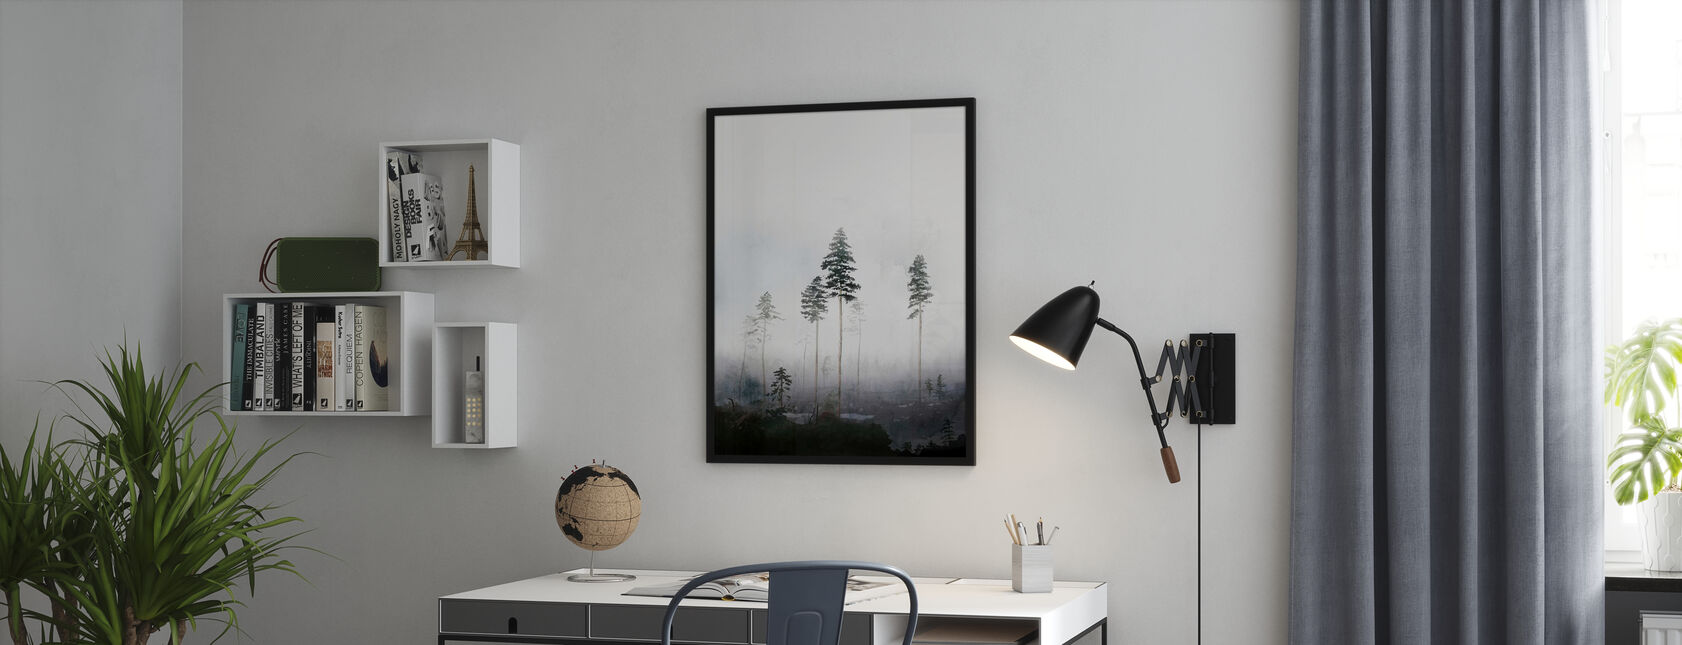 Kalhygge - Poster - Office